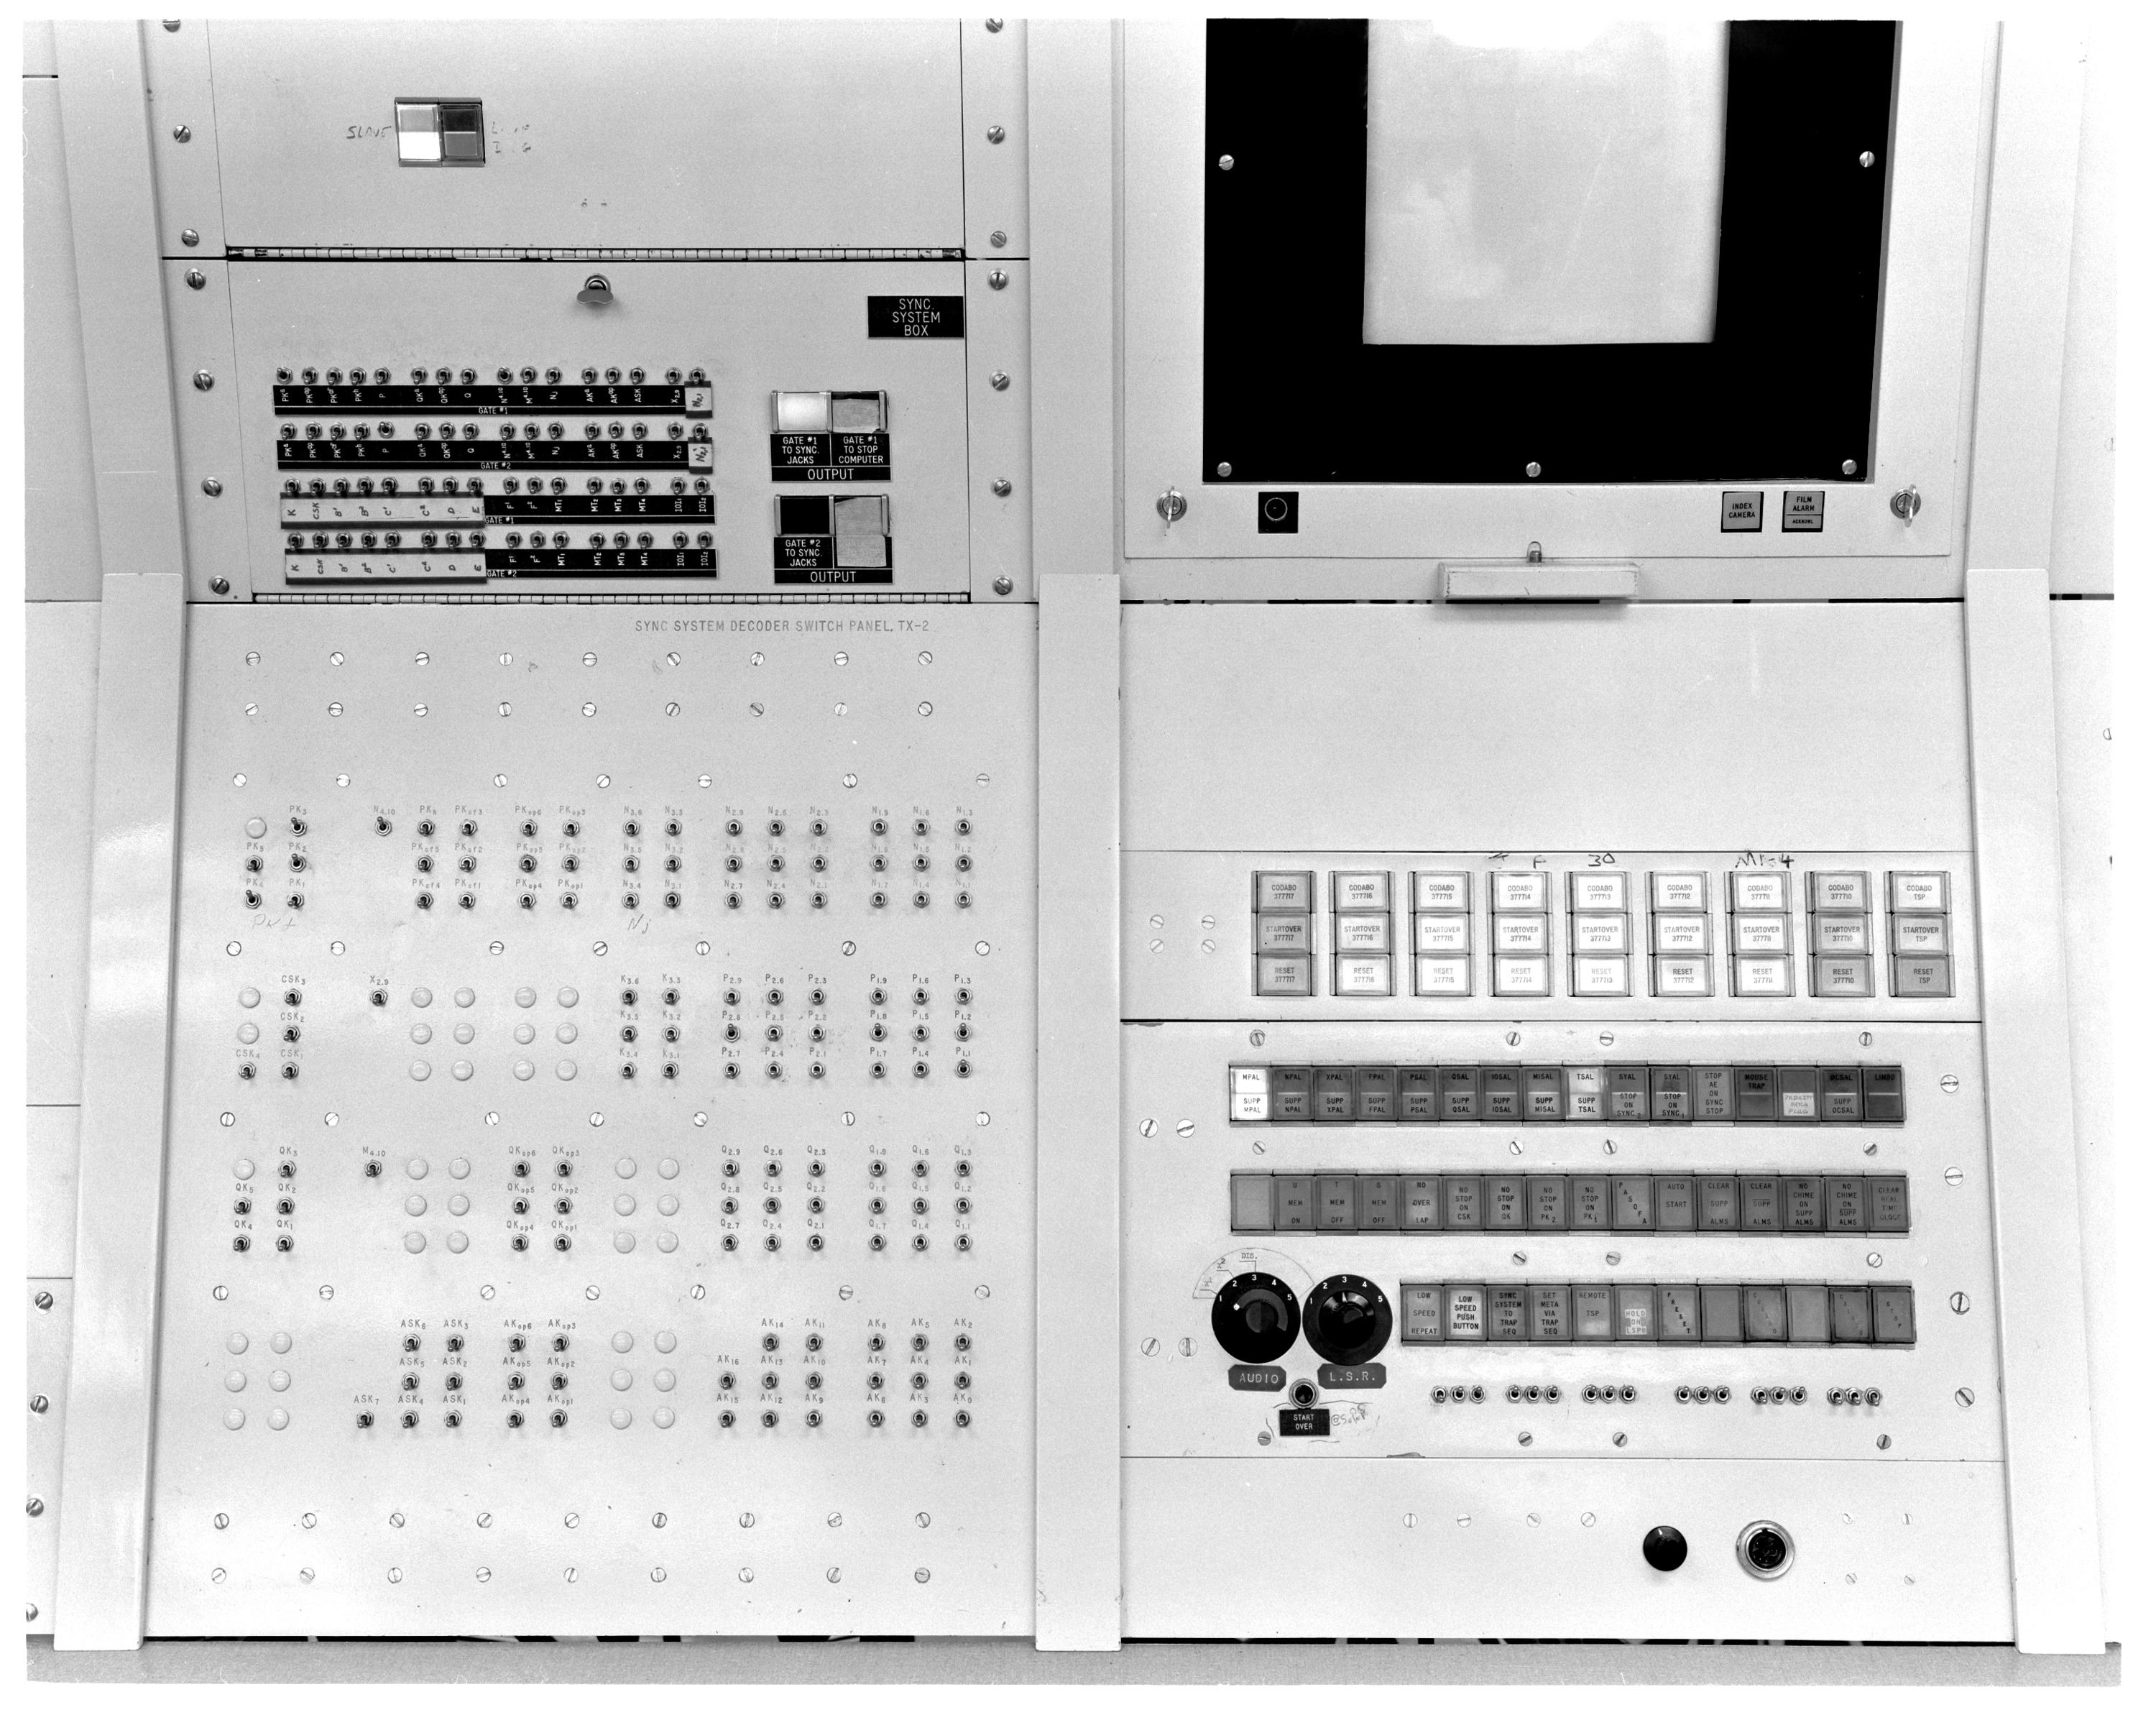 P91-215: 02/28/1963, A Cropped version of this photo, showing the
right side of the photo, appears is in: "TX-2 Users Handbook," Lincoln
Manual No. 45, July, 1961, p. 5-11, Figure 5-5.: Alarms, conditions
and Action Pushbuttons. [same photo also appears on pp. 5-16 and
5-18]; A Cropped version of this photo, showing the left side of the
photo, appears in: "TX-2 Users Handbook," Lincoln Manual No. 45, July,
1961, p. 5-21, Figure 5-9.: TX-2 Sync
System.